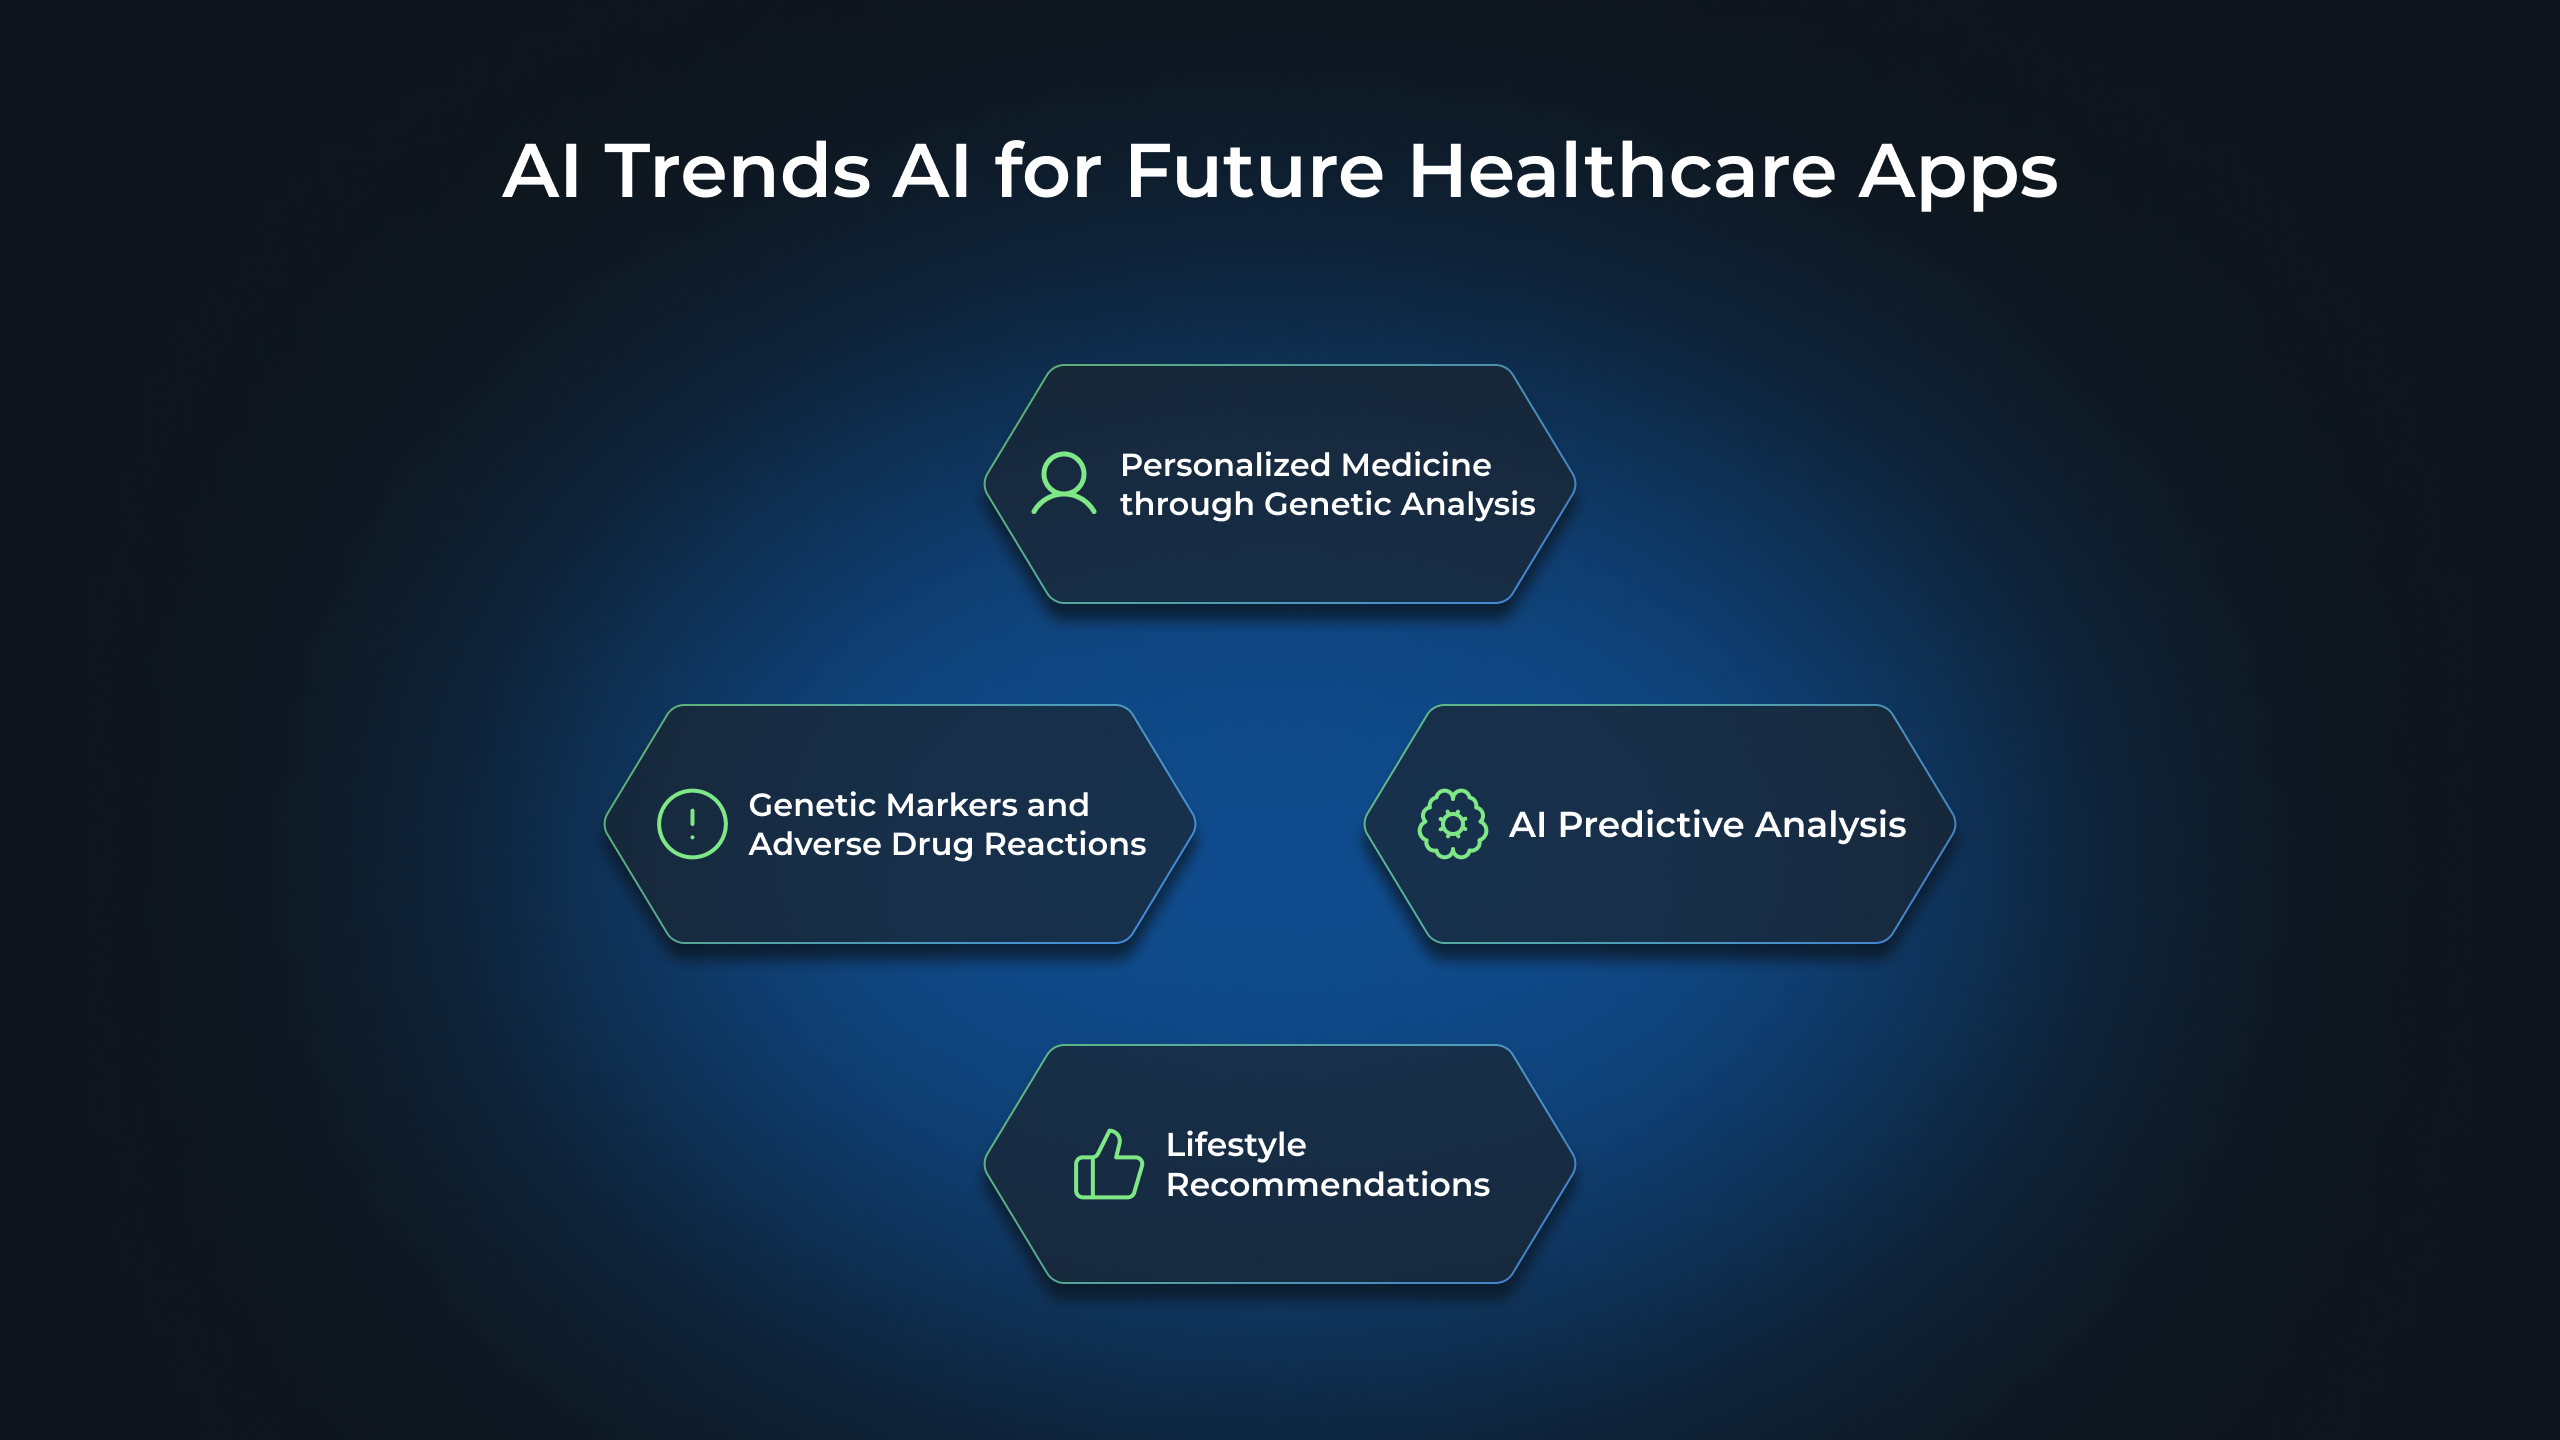 AI Trends AI for Future Healthcare Apps: Personalized Medicine through Genetic Analysis, Genetic Markers and Adverse Drug Reactions, AI Predictive Analysis, Lifestyle Recommendations
